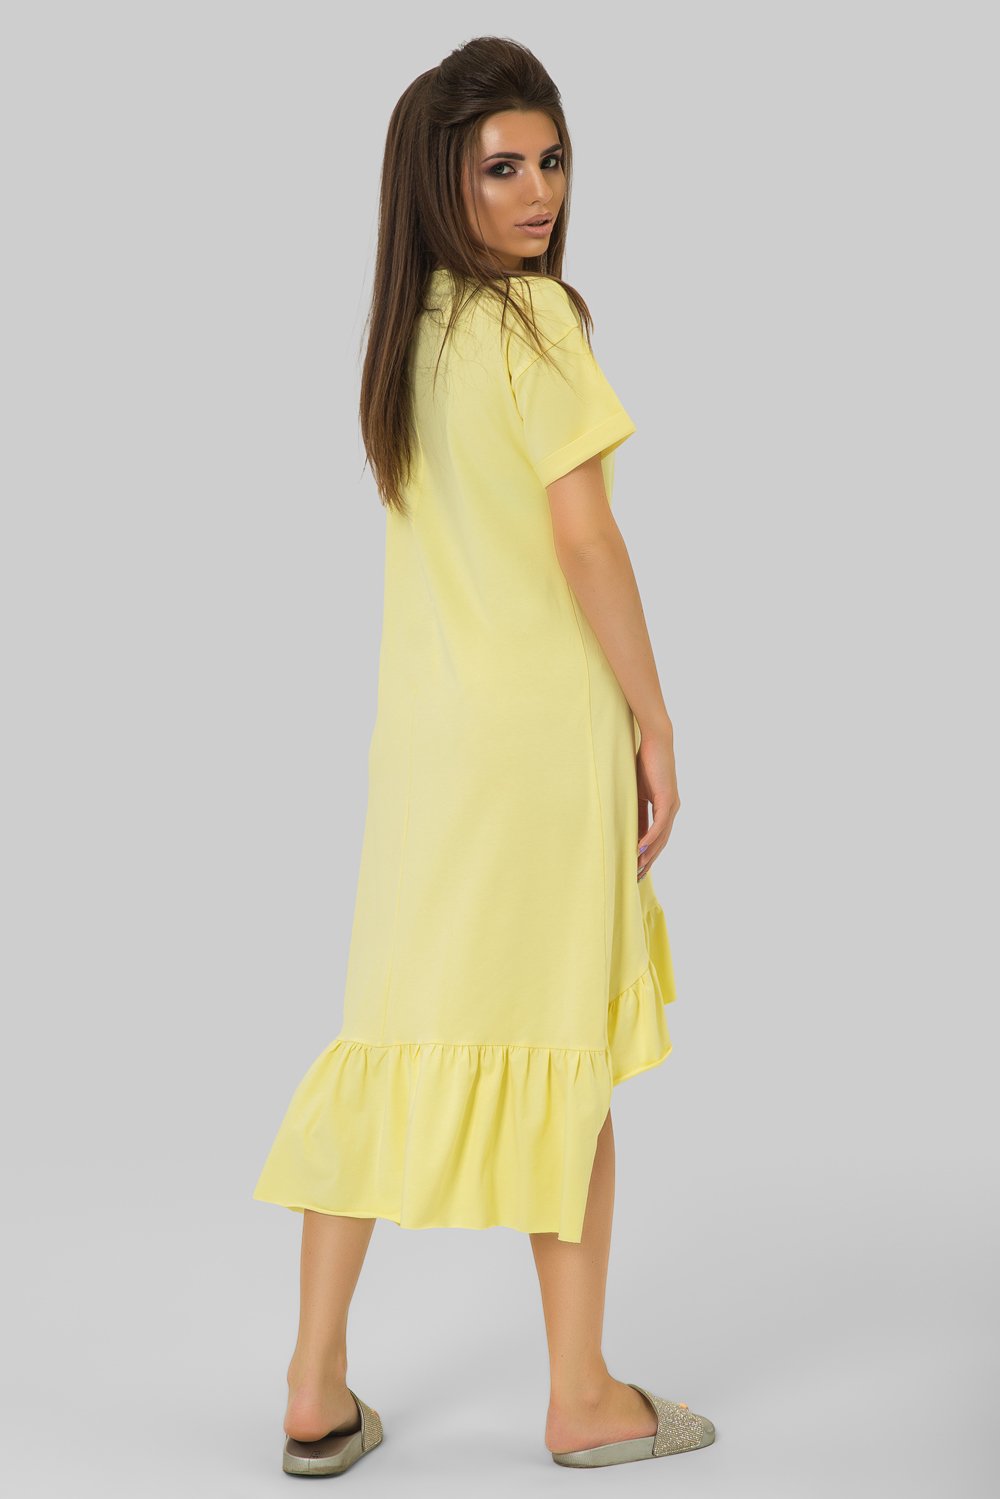 Yellow knitted dress with ruffle at the bottom